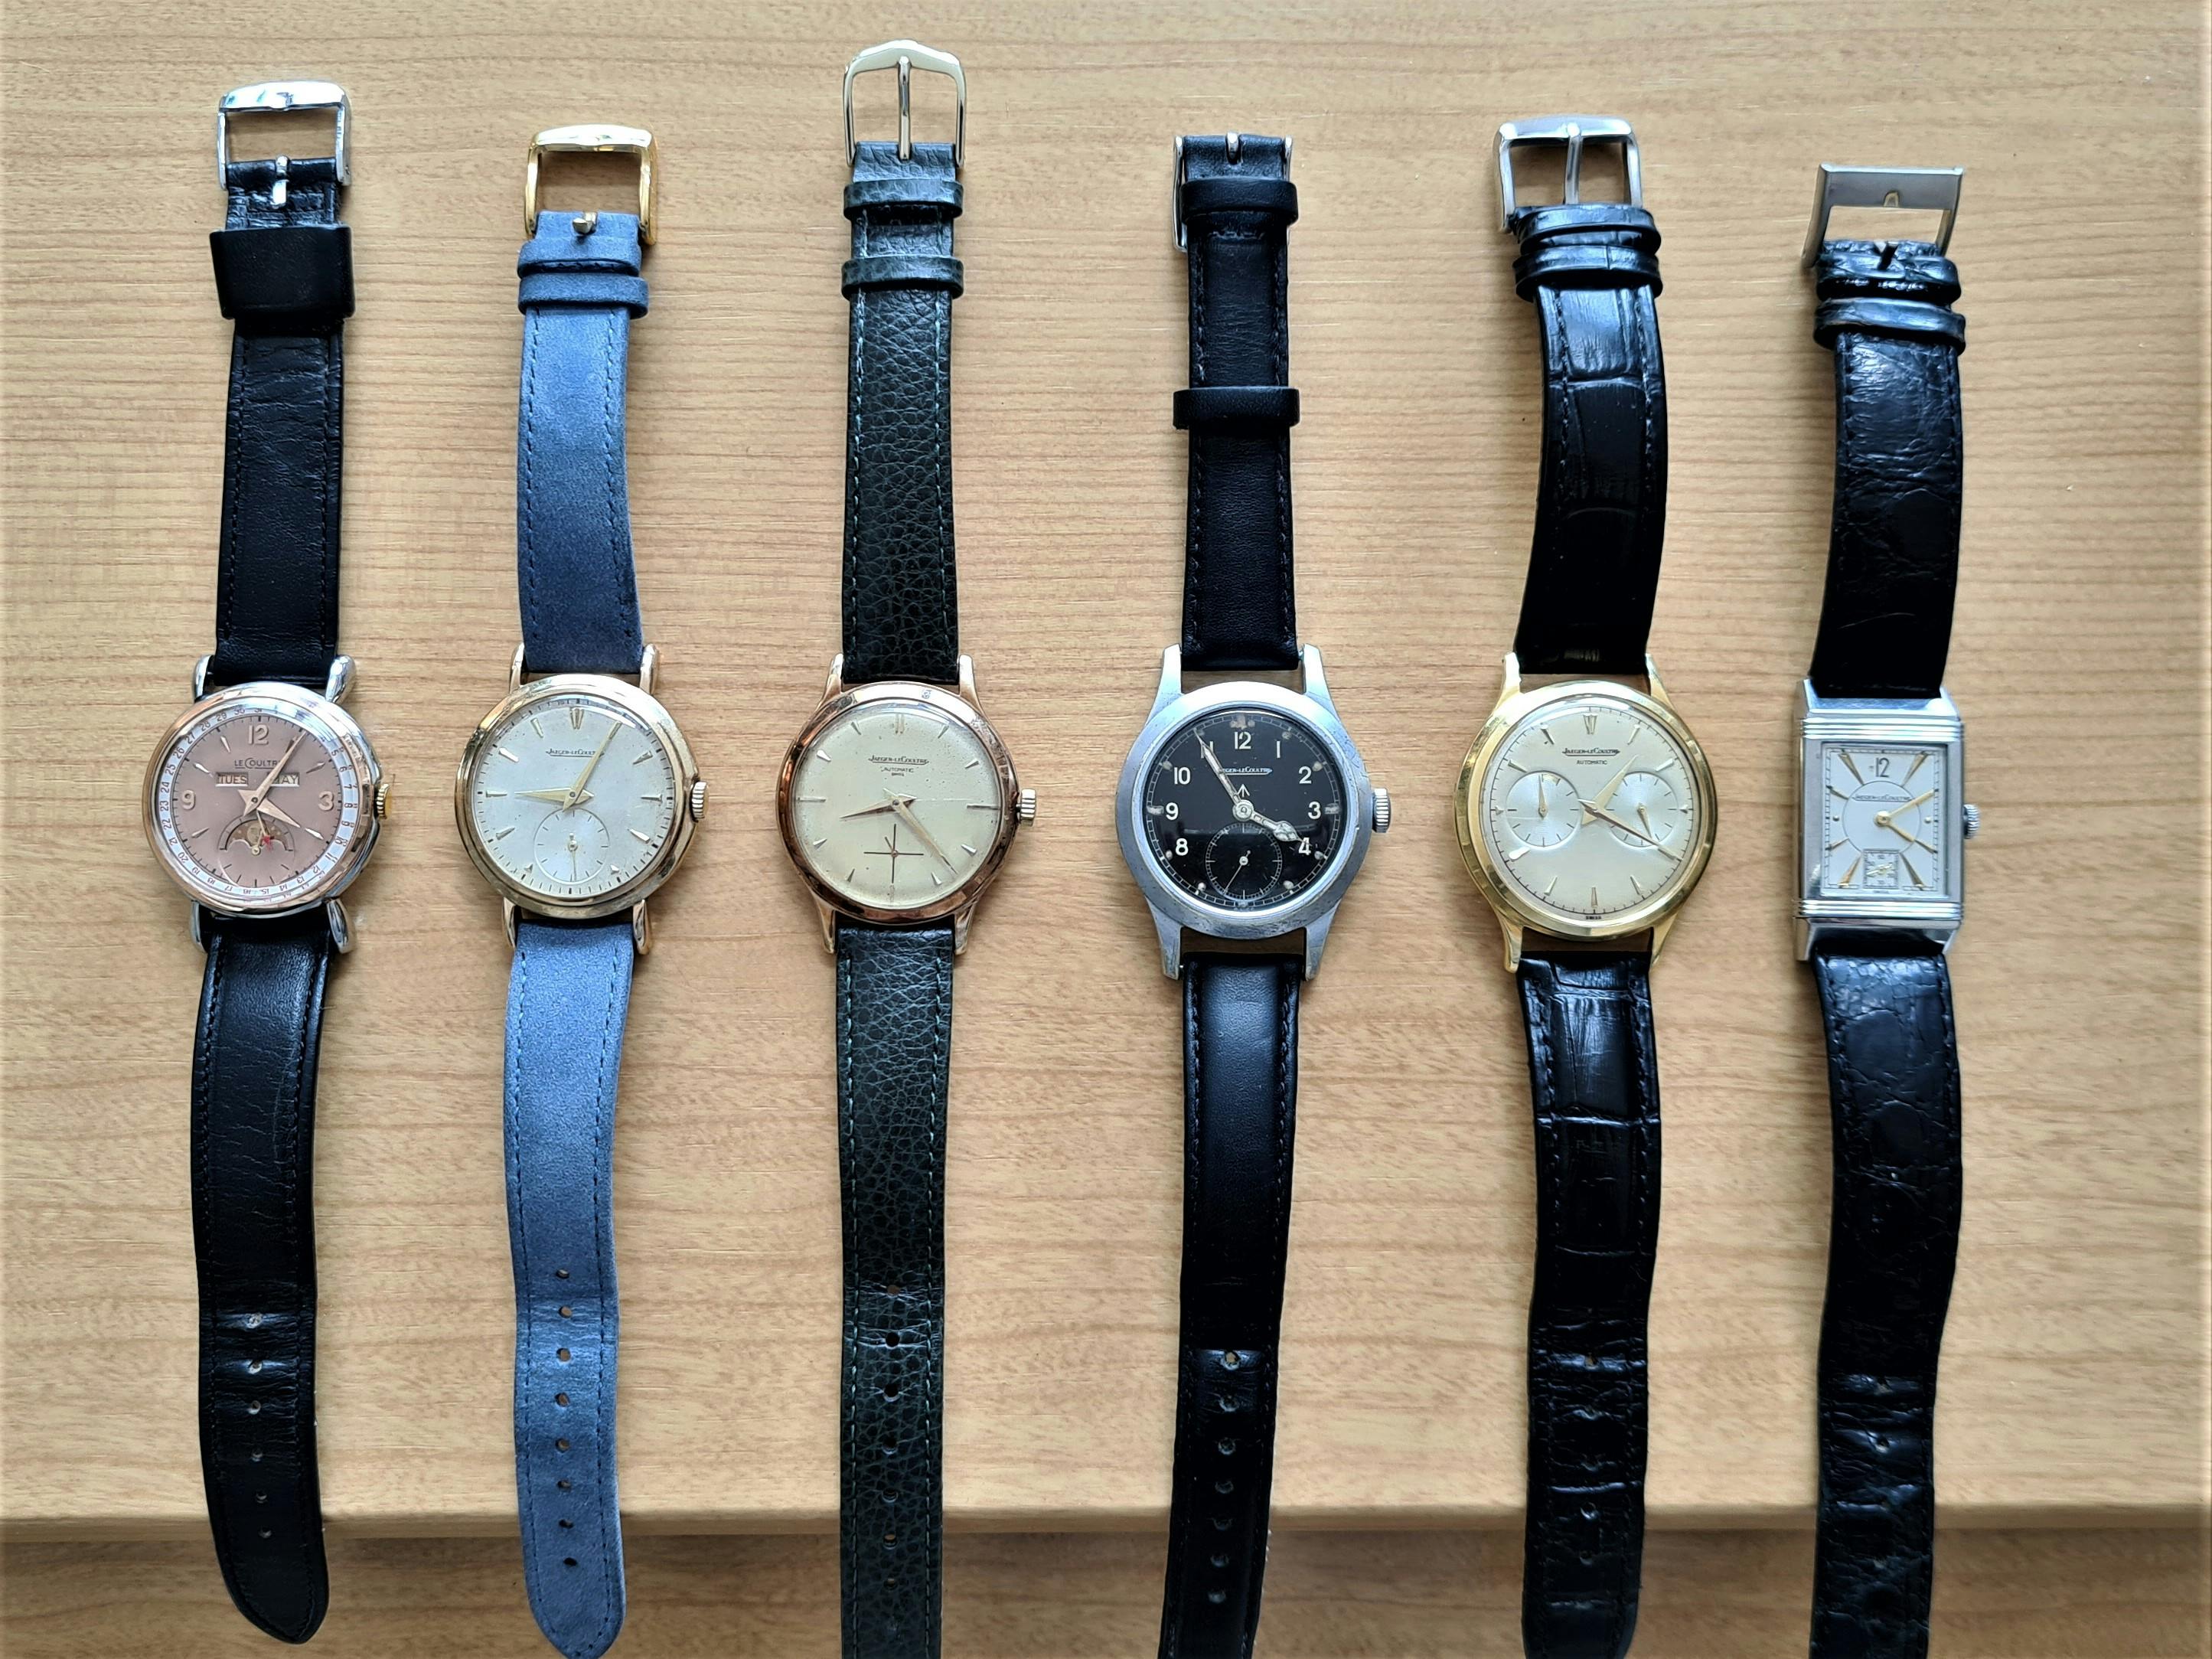 Six watches made by Jaeger LeCoultre sitting on a table with different case colours, dials and straps